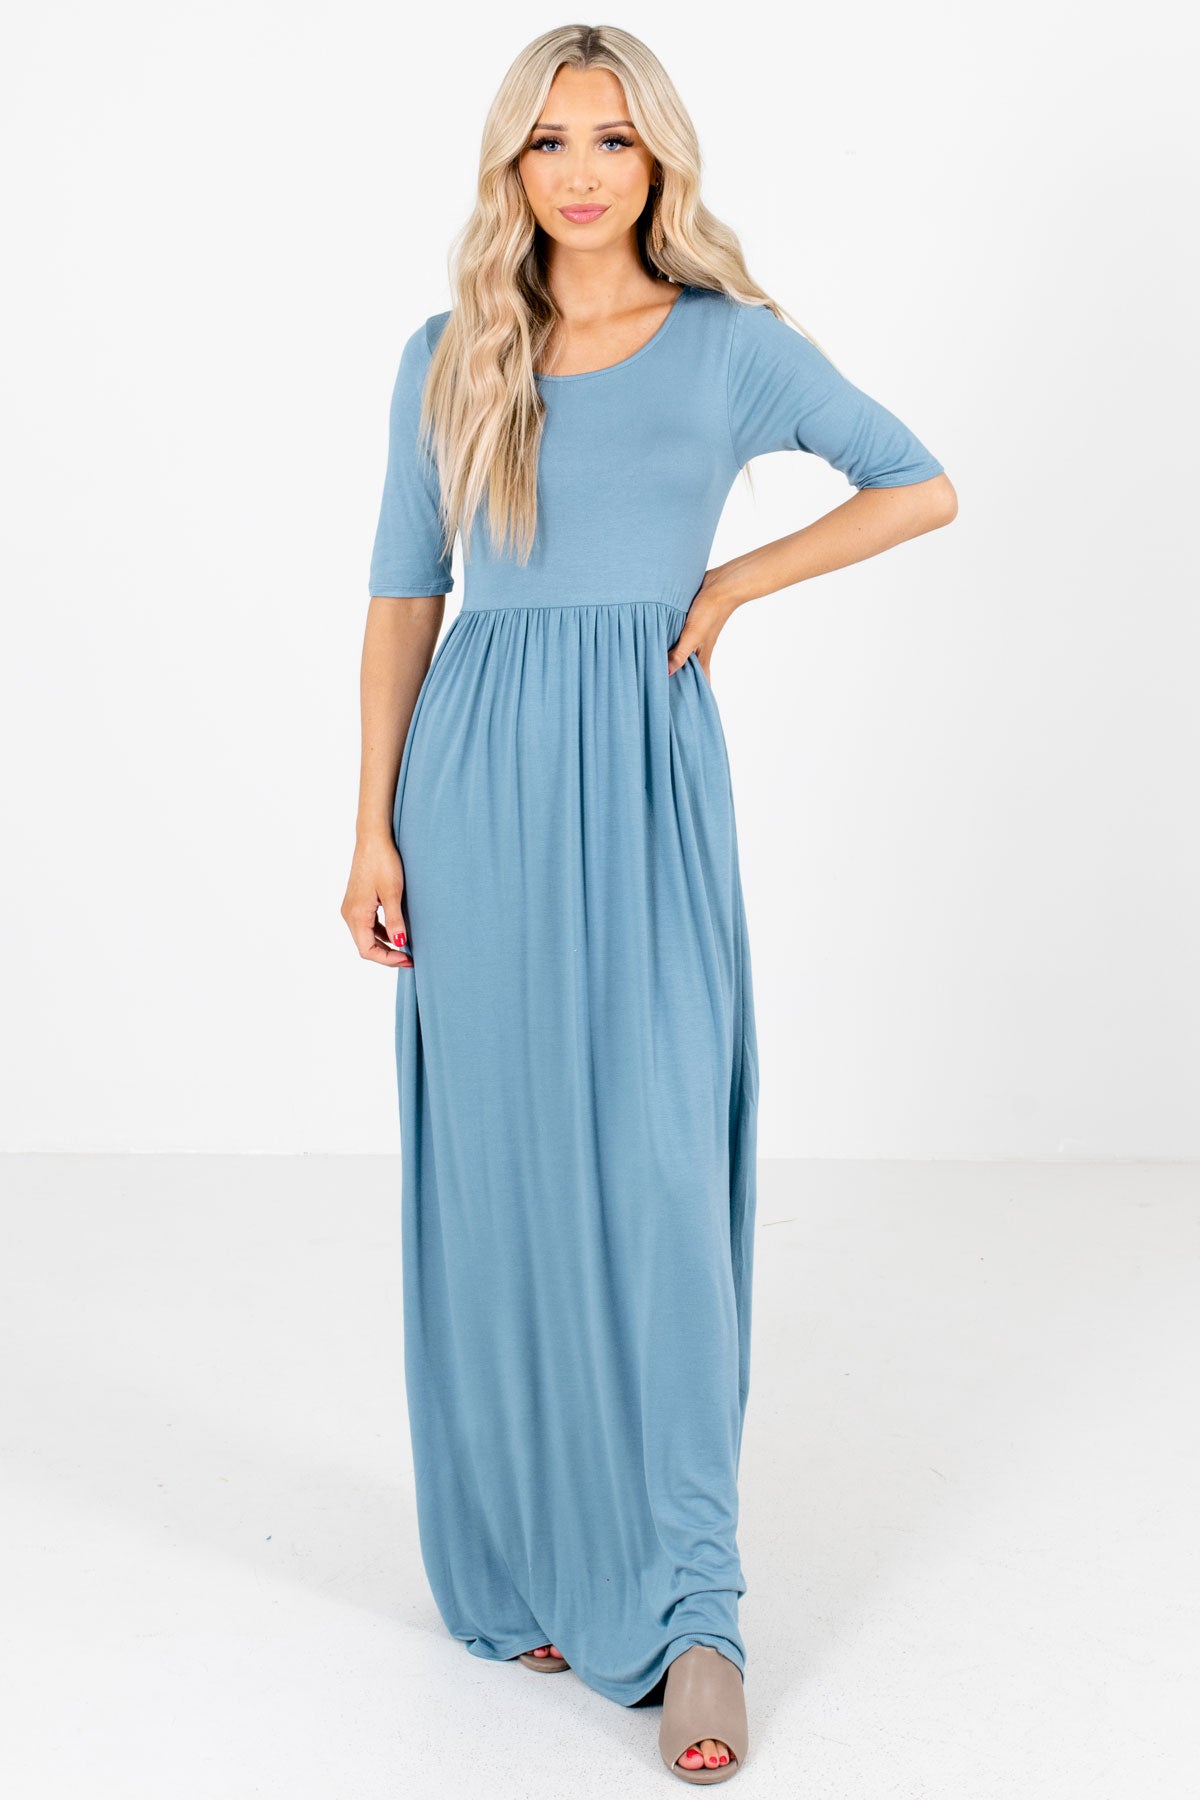 Blue Cute and Comfortable Boutique Maxi Dresses for Women